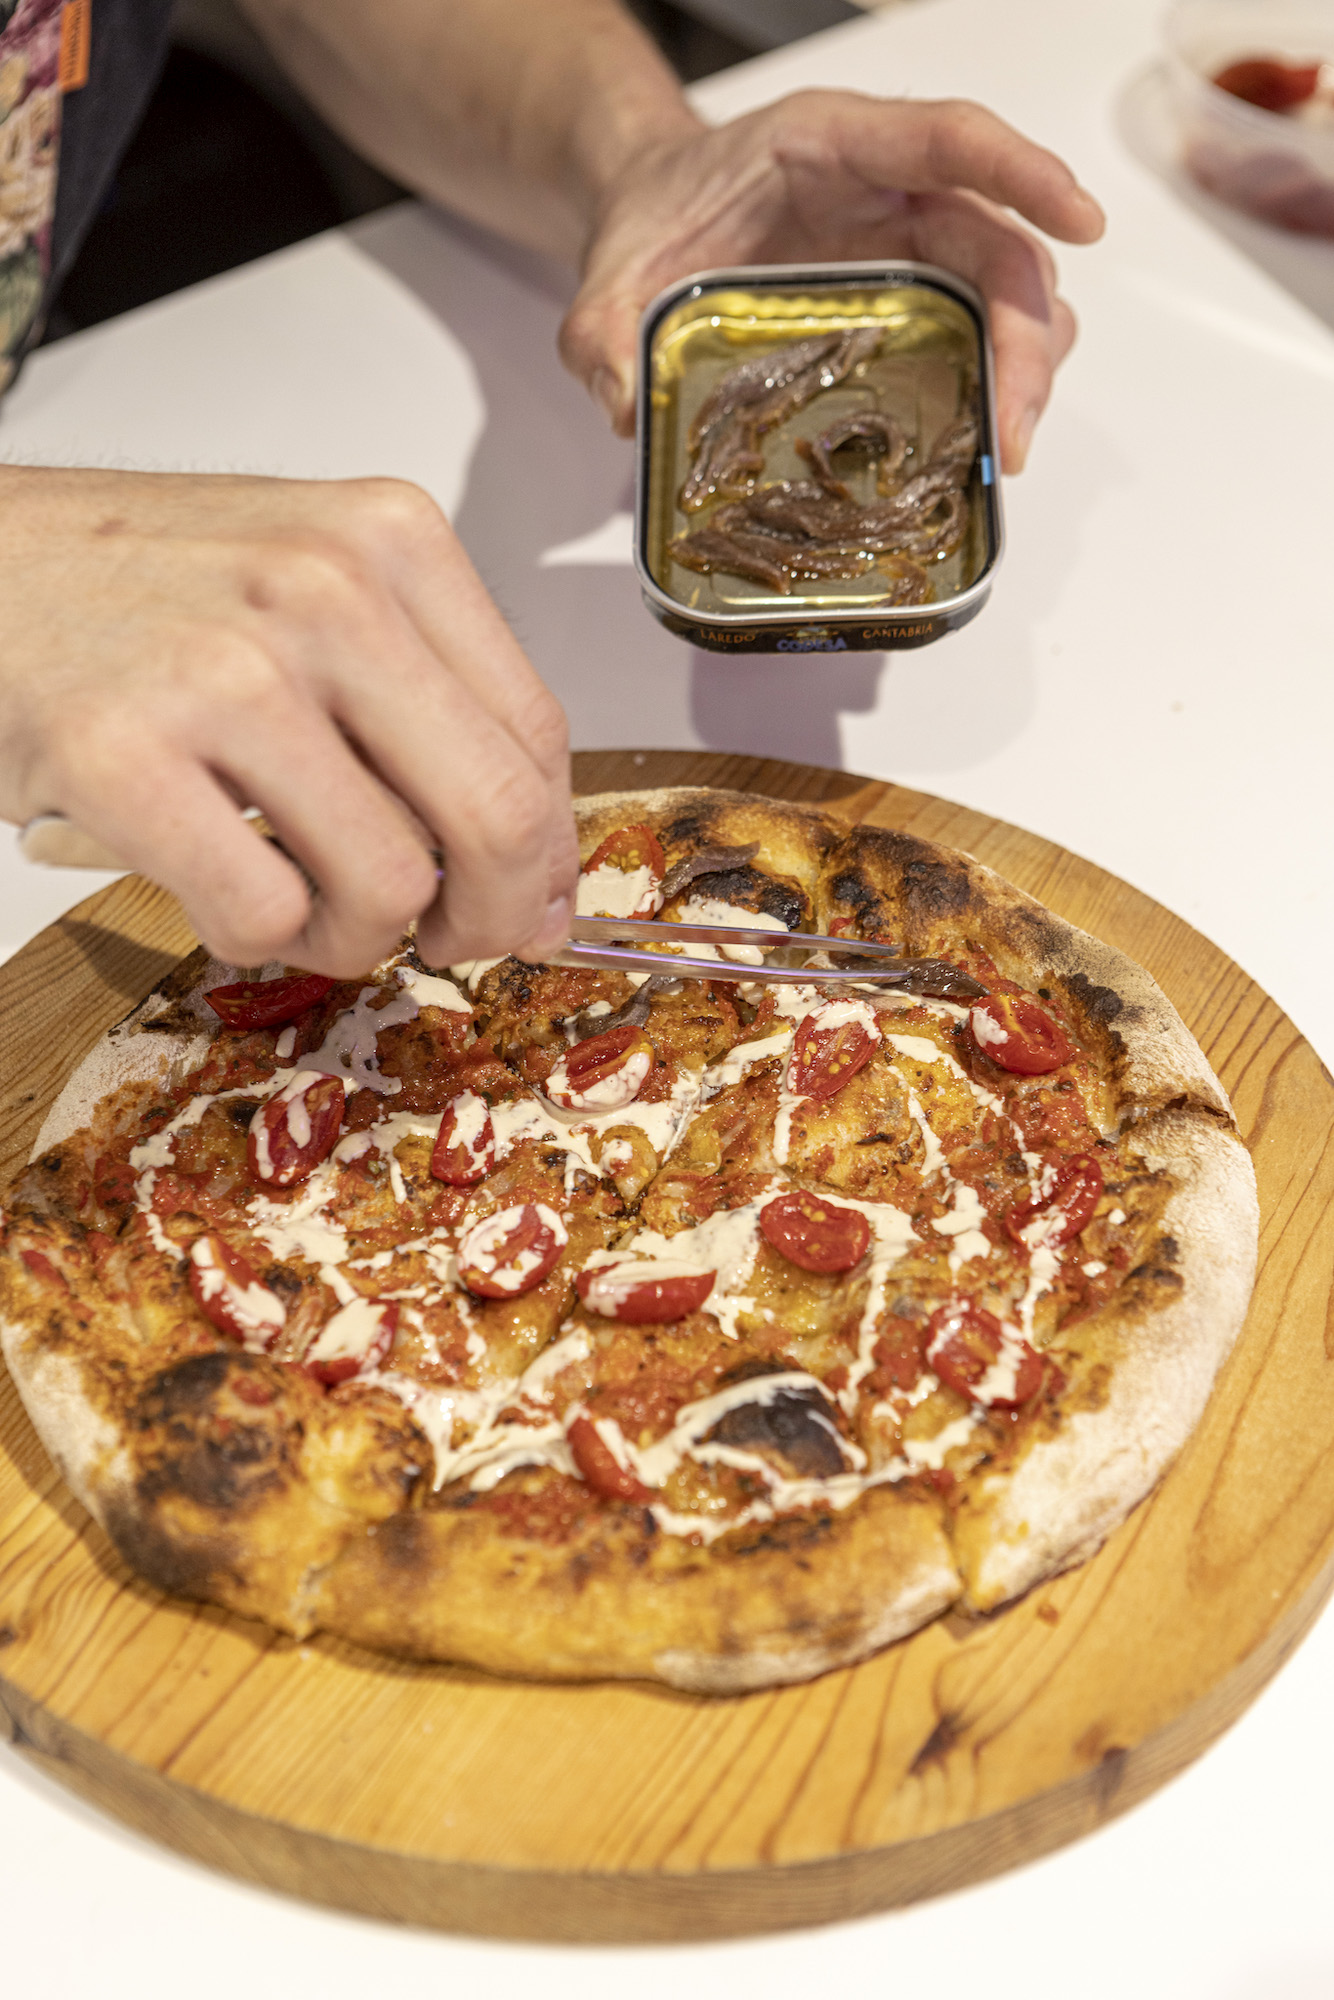 The not-so-secret ingredient to the marinara pizza's power? Cantabrian anchovies, which are renowned for their quality, umami flavor, and storied canning history